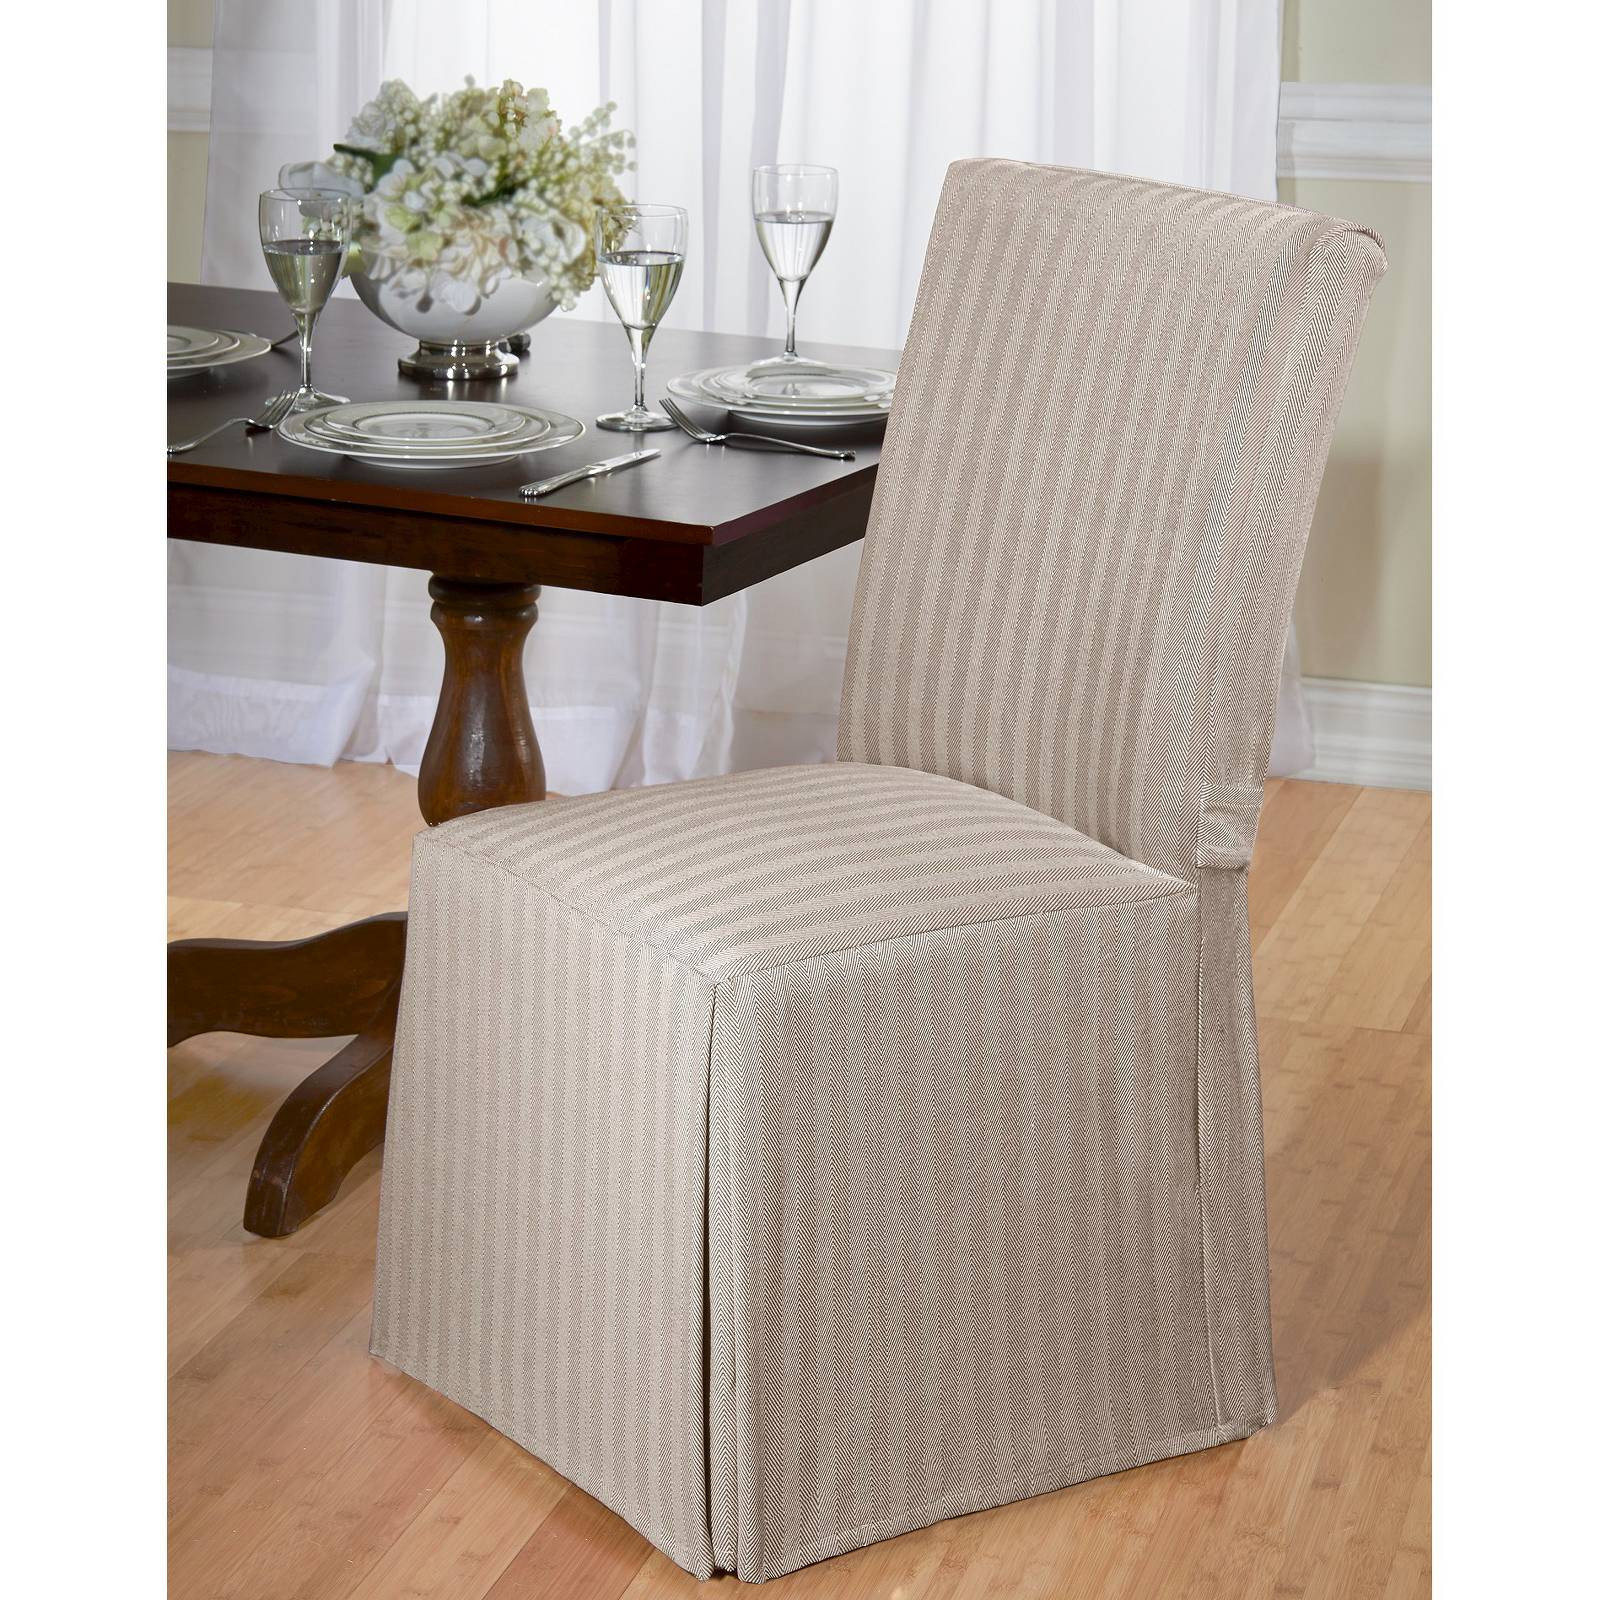 Best ideas about Dining Chair Cover
. Save or Pin Herringbone Dining Room Chair Slipcover Now.